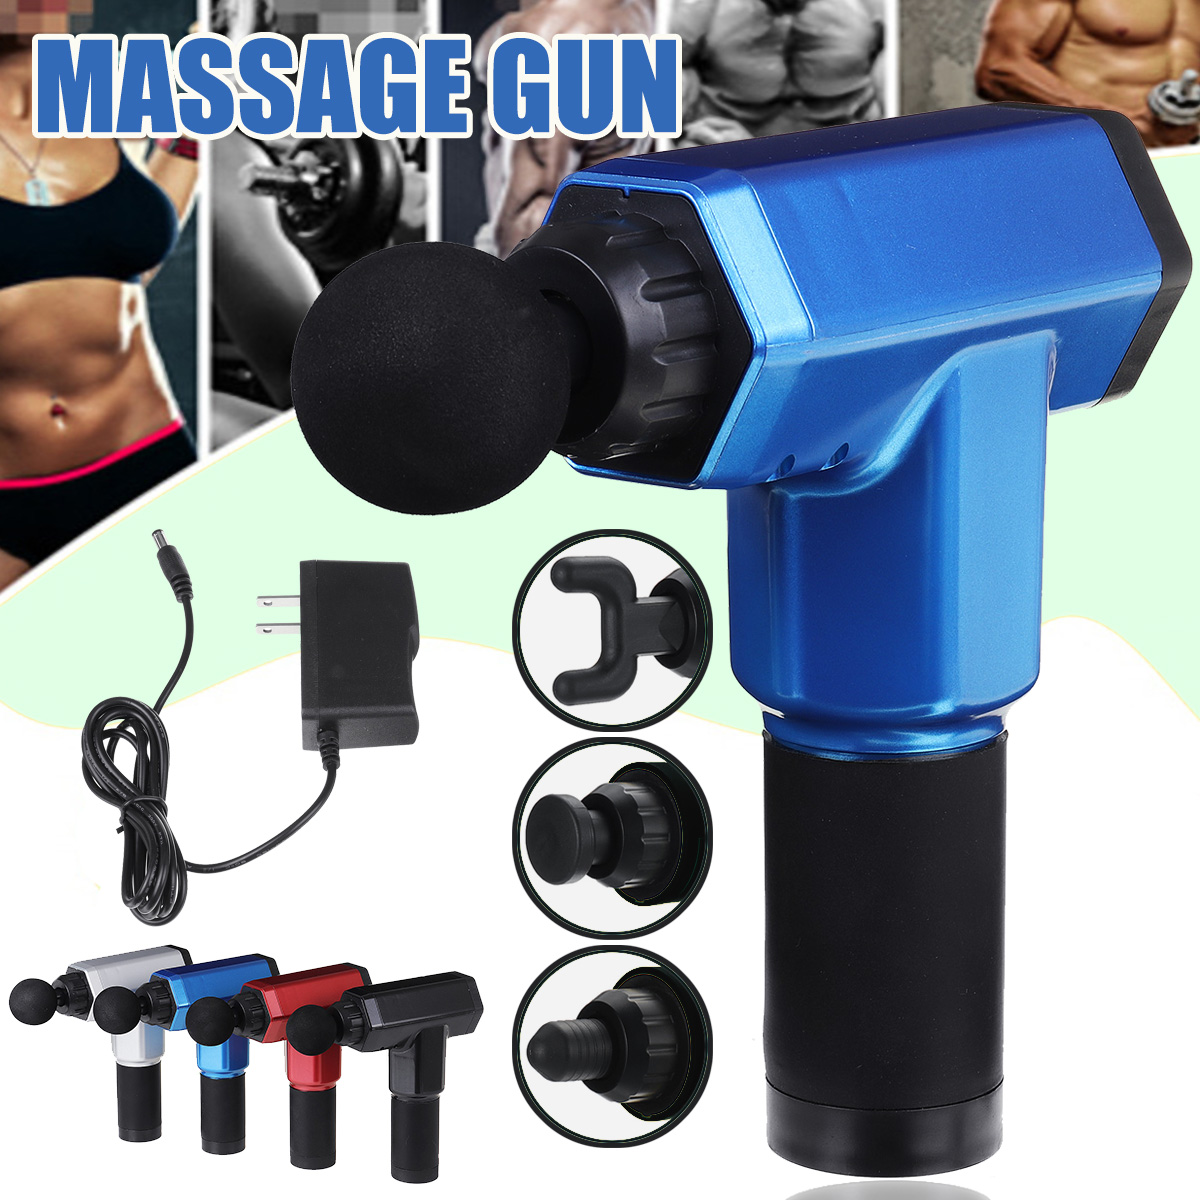 Electric-Muscle-Massager-6-speed-Adjustment-LED-Display-USB-Rechargeable-Fascia-Deep-Vibration-Physi-1710558-1